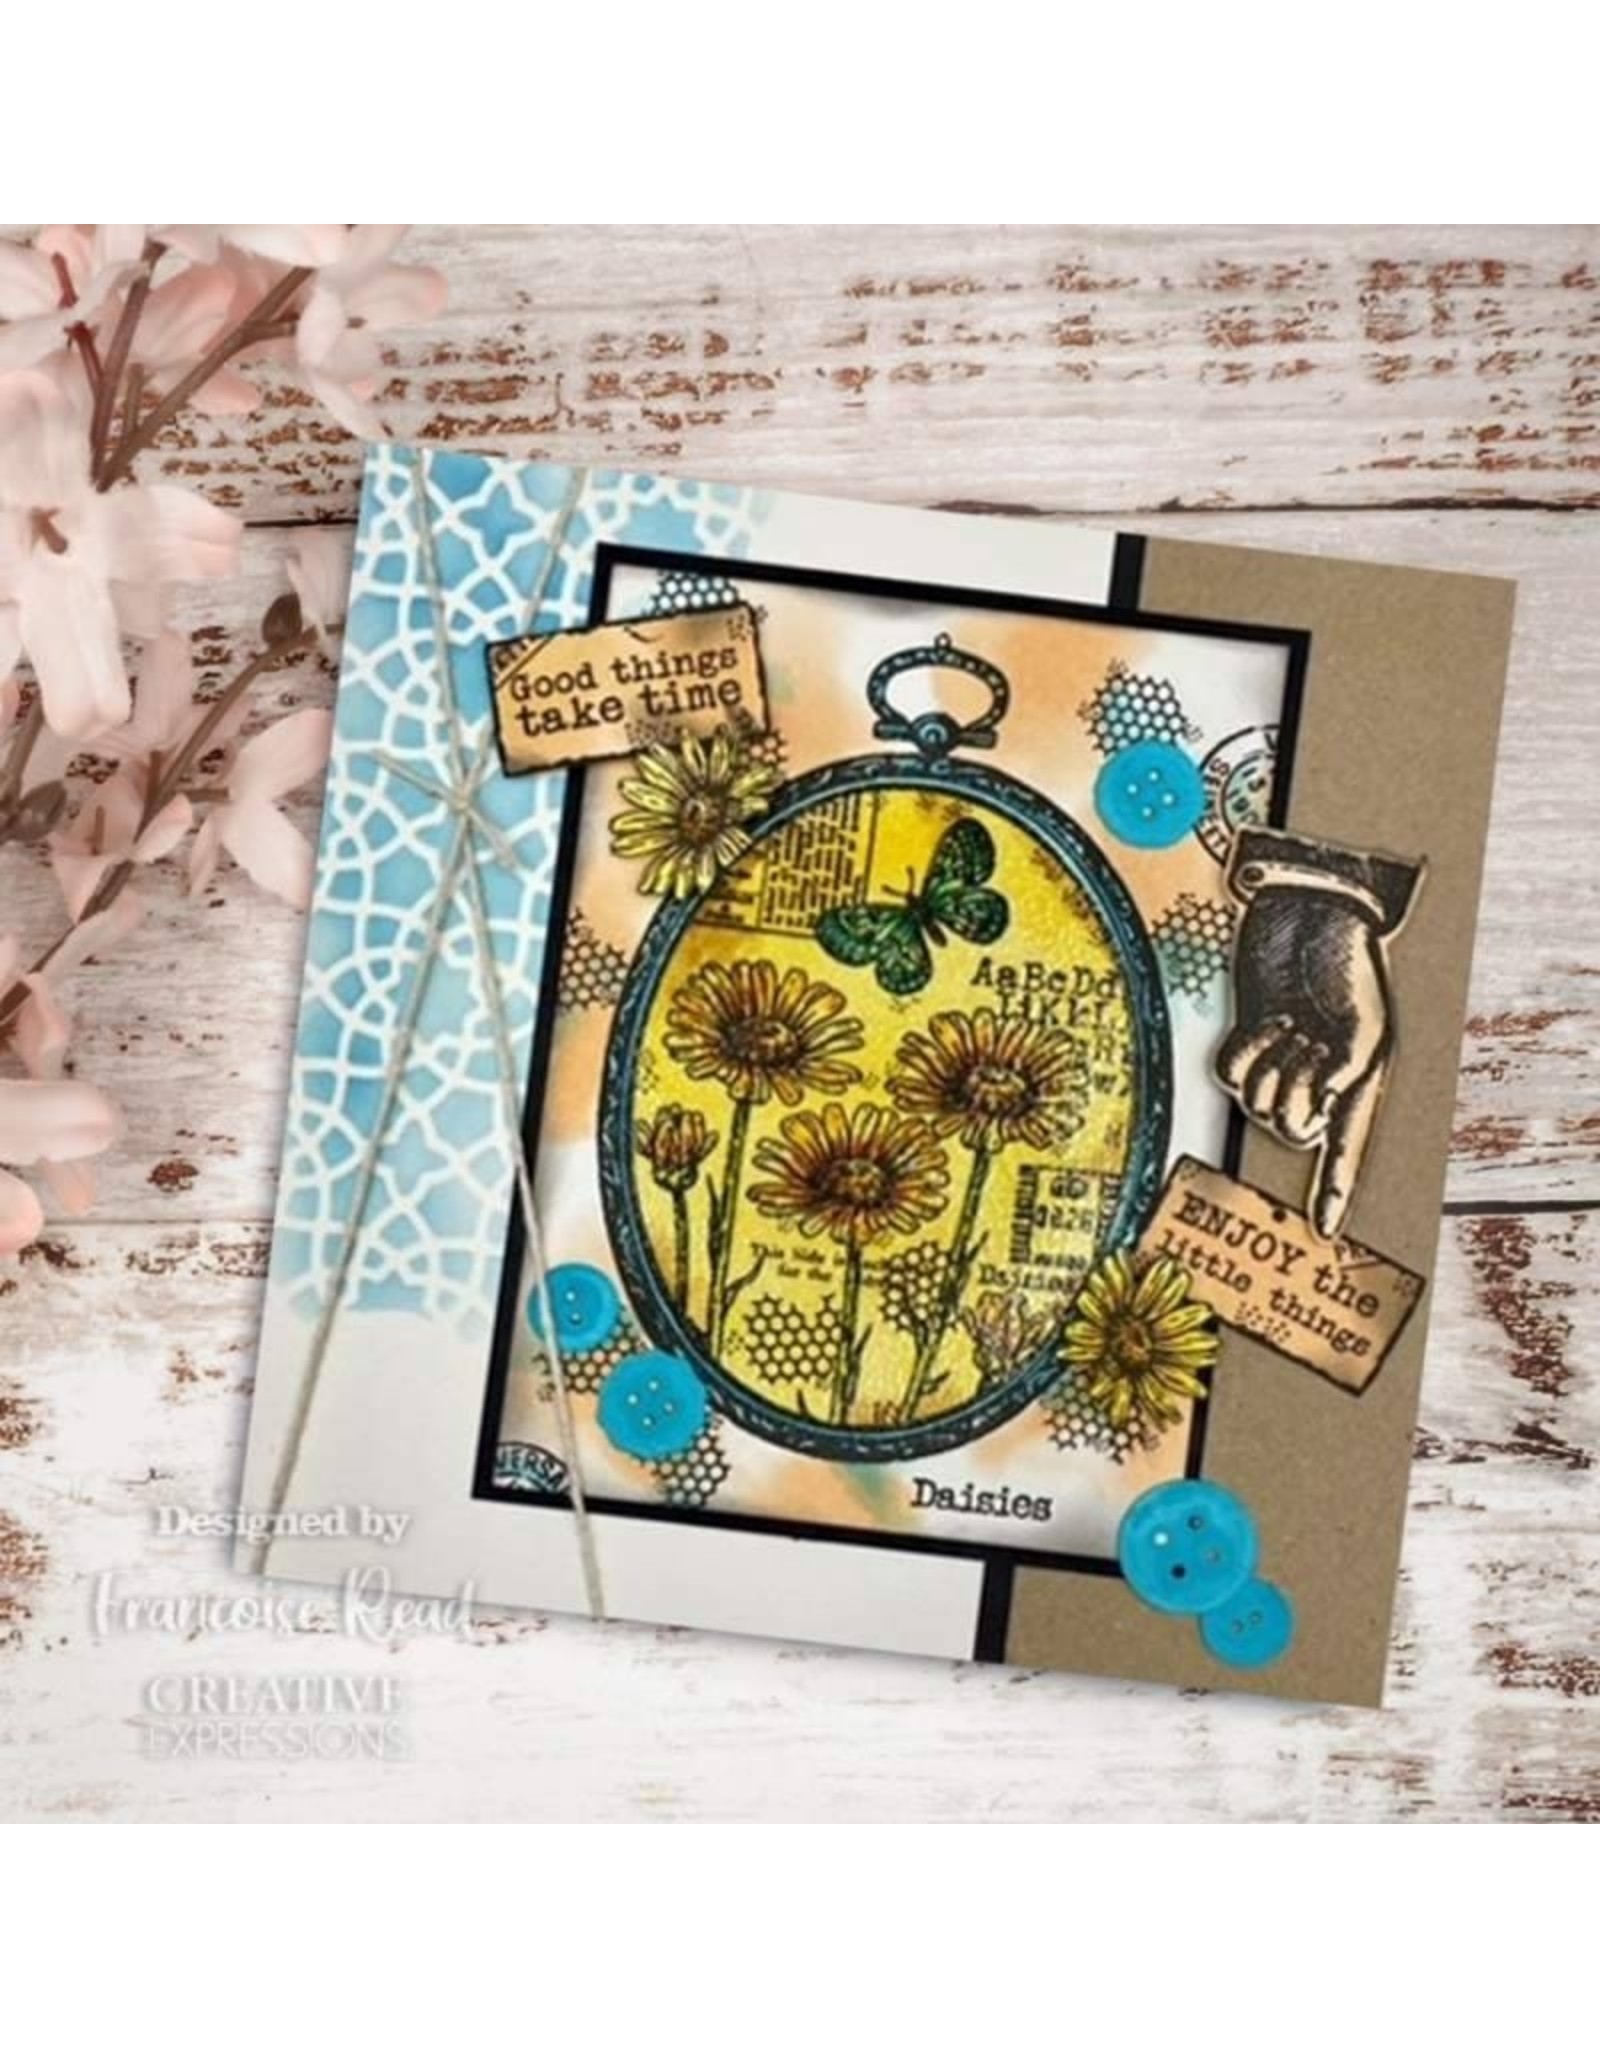 WOODWARE CRAFT COLLECTION WOODWARE CRAFT COLLECTION FRANCOISE READ DISTRESSED LABELS CLEAR STAMP SET